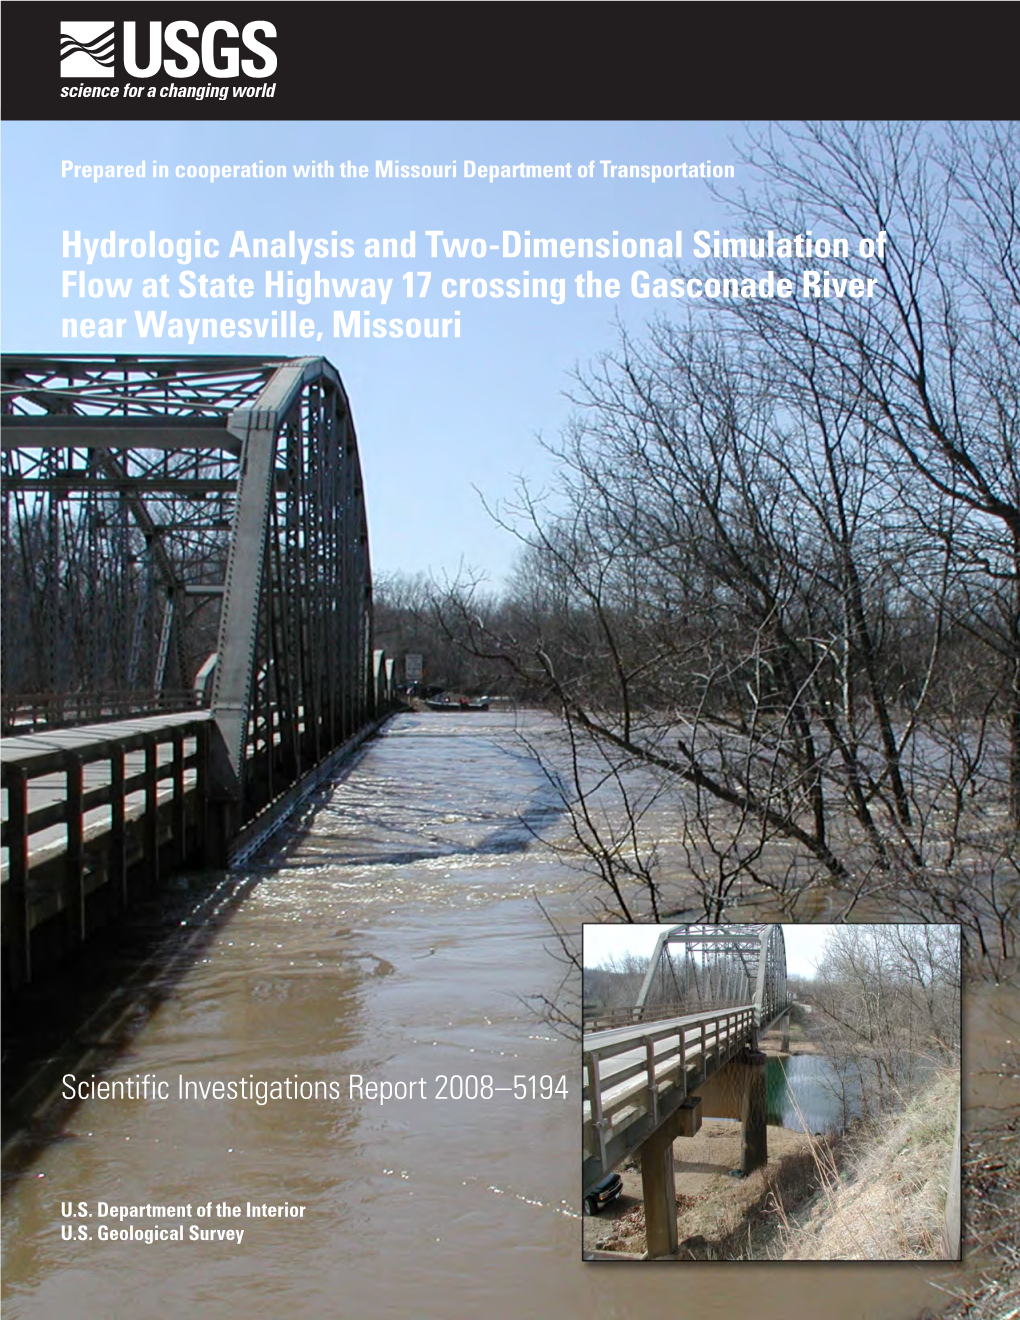 Hydrologic Analysis and Two-Dimensional Simulation of Flow at State Highway 17 Crossing the Gasconade River Near Waynesville, Missouri